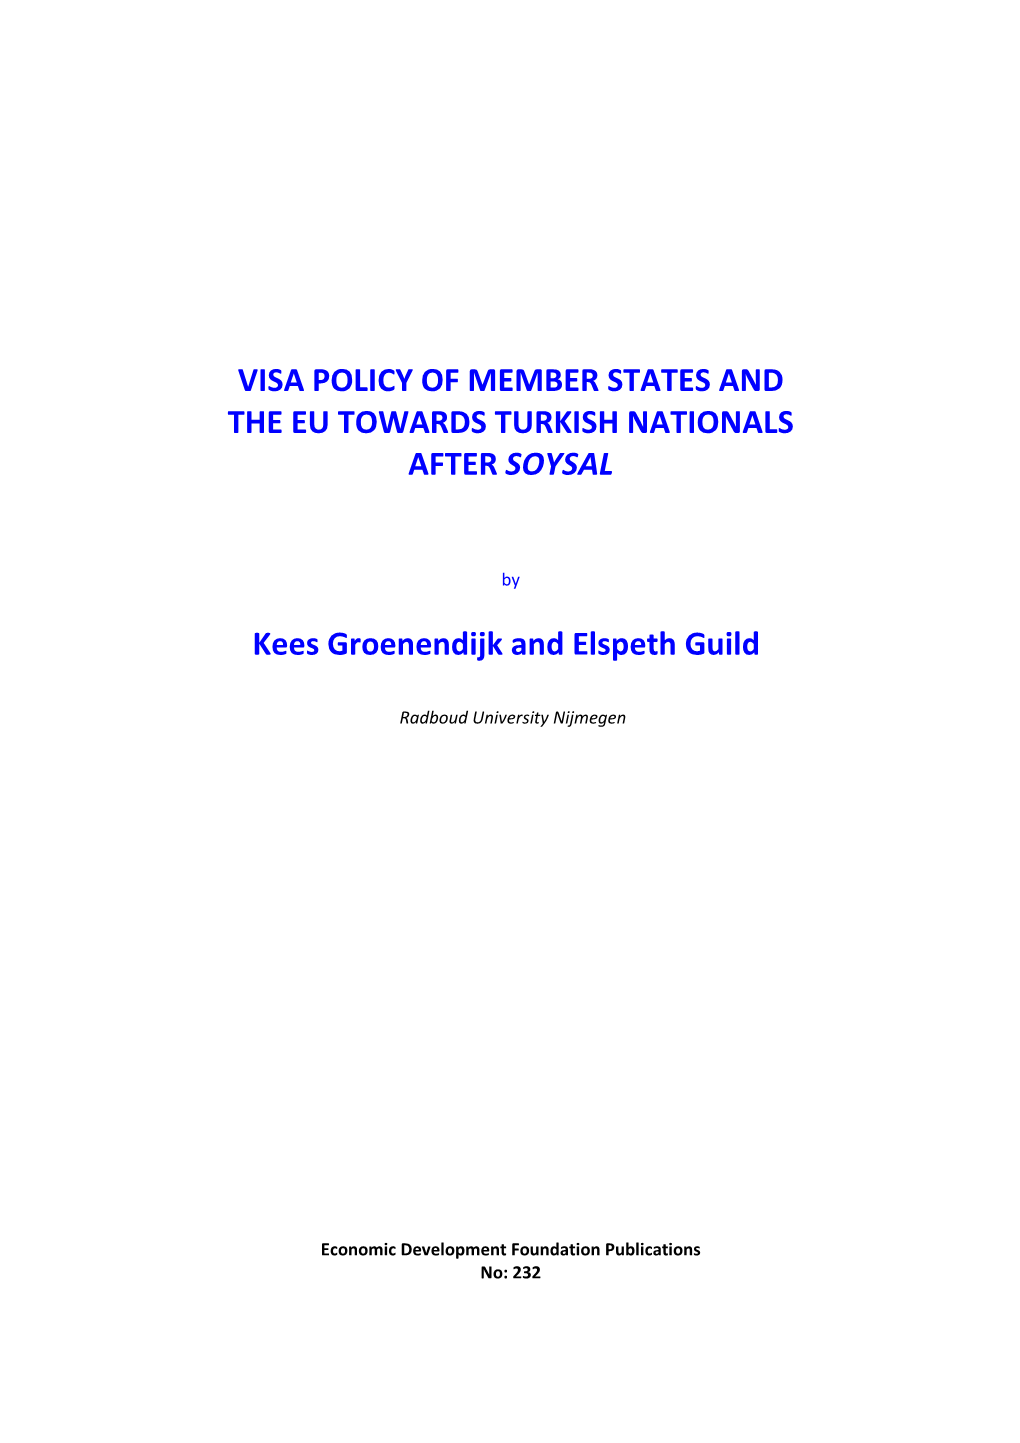 Visa Policy of Member States and the Eu Towards Turkish Nationals After Soysal